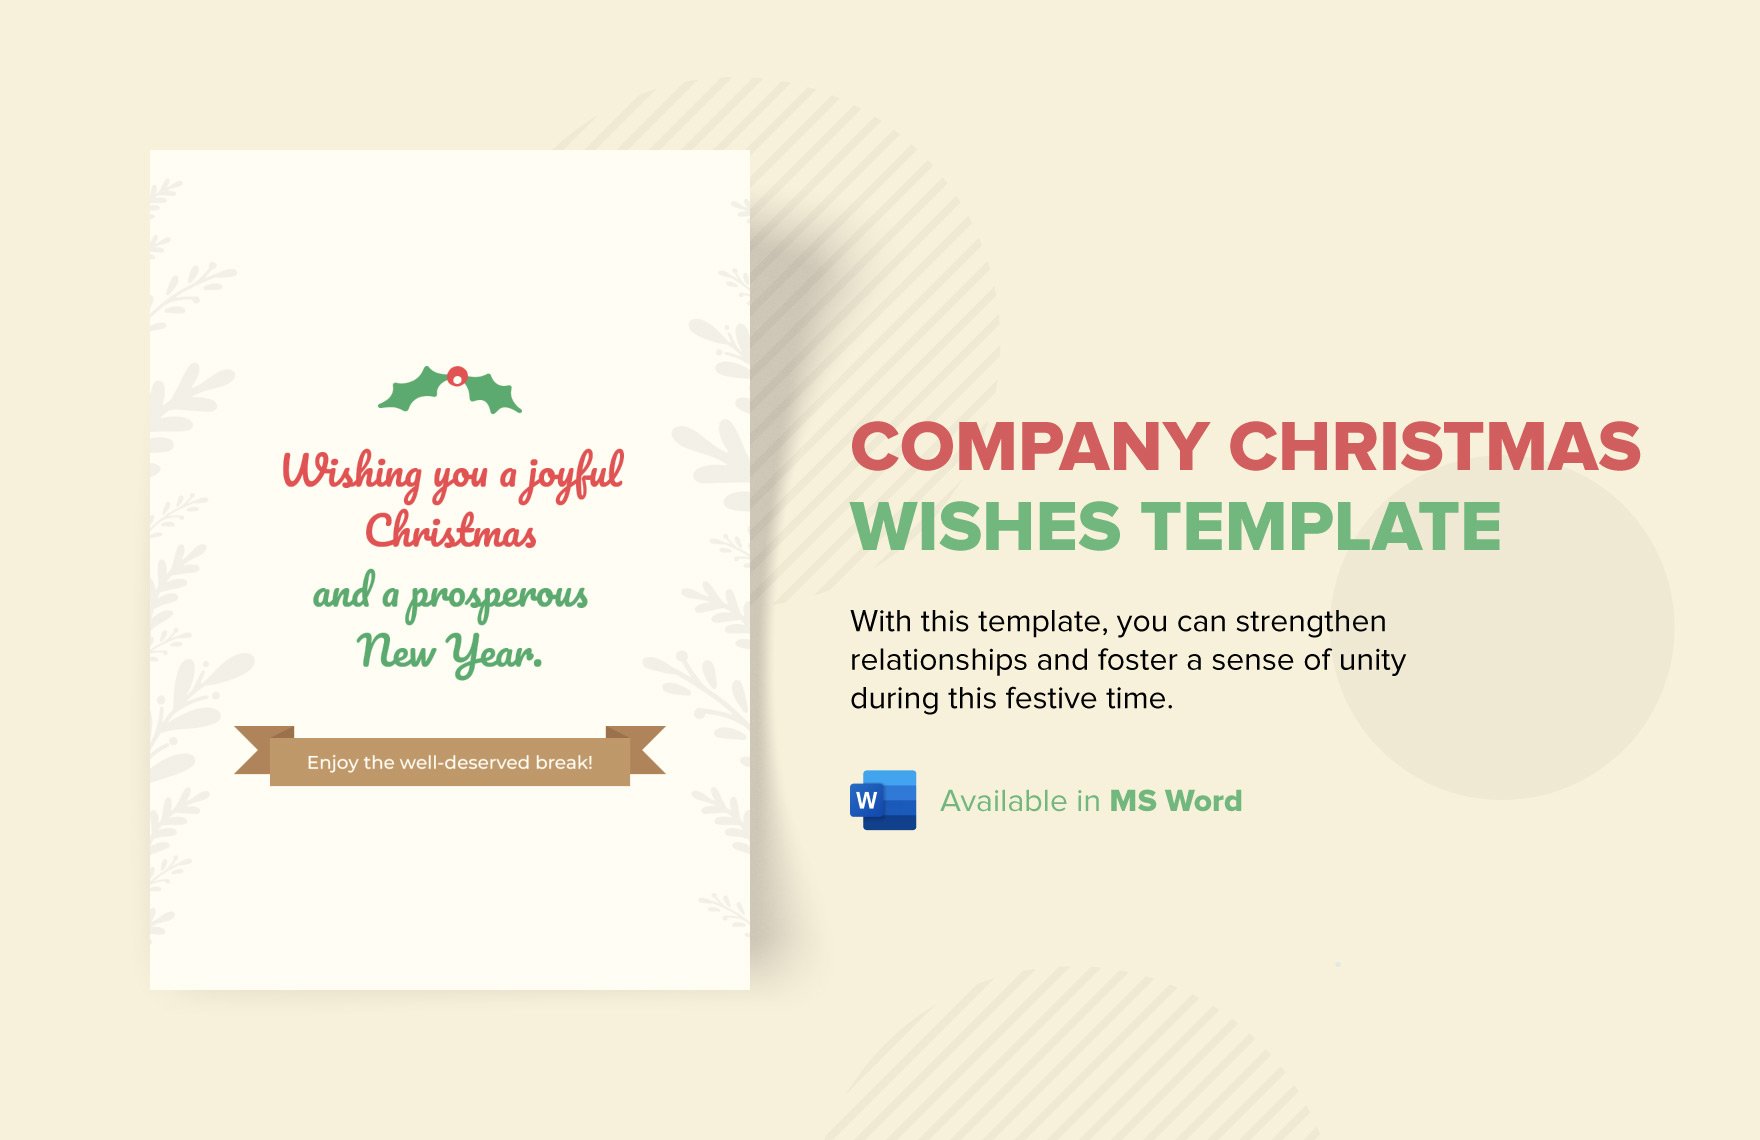 Company Christmas Wishes Template